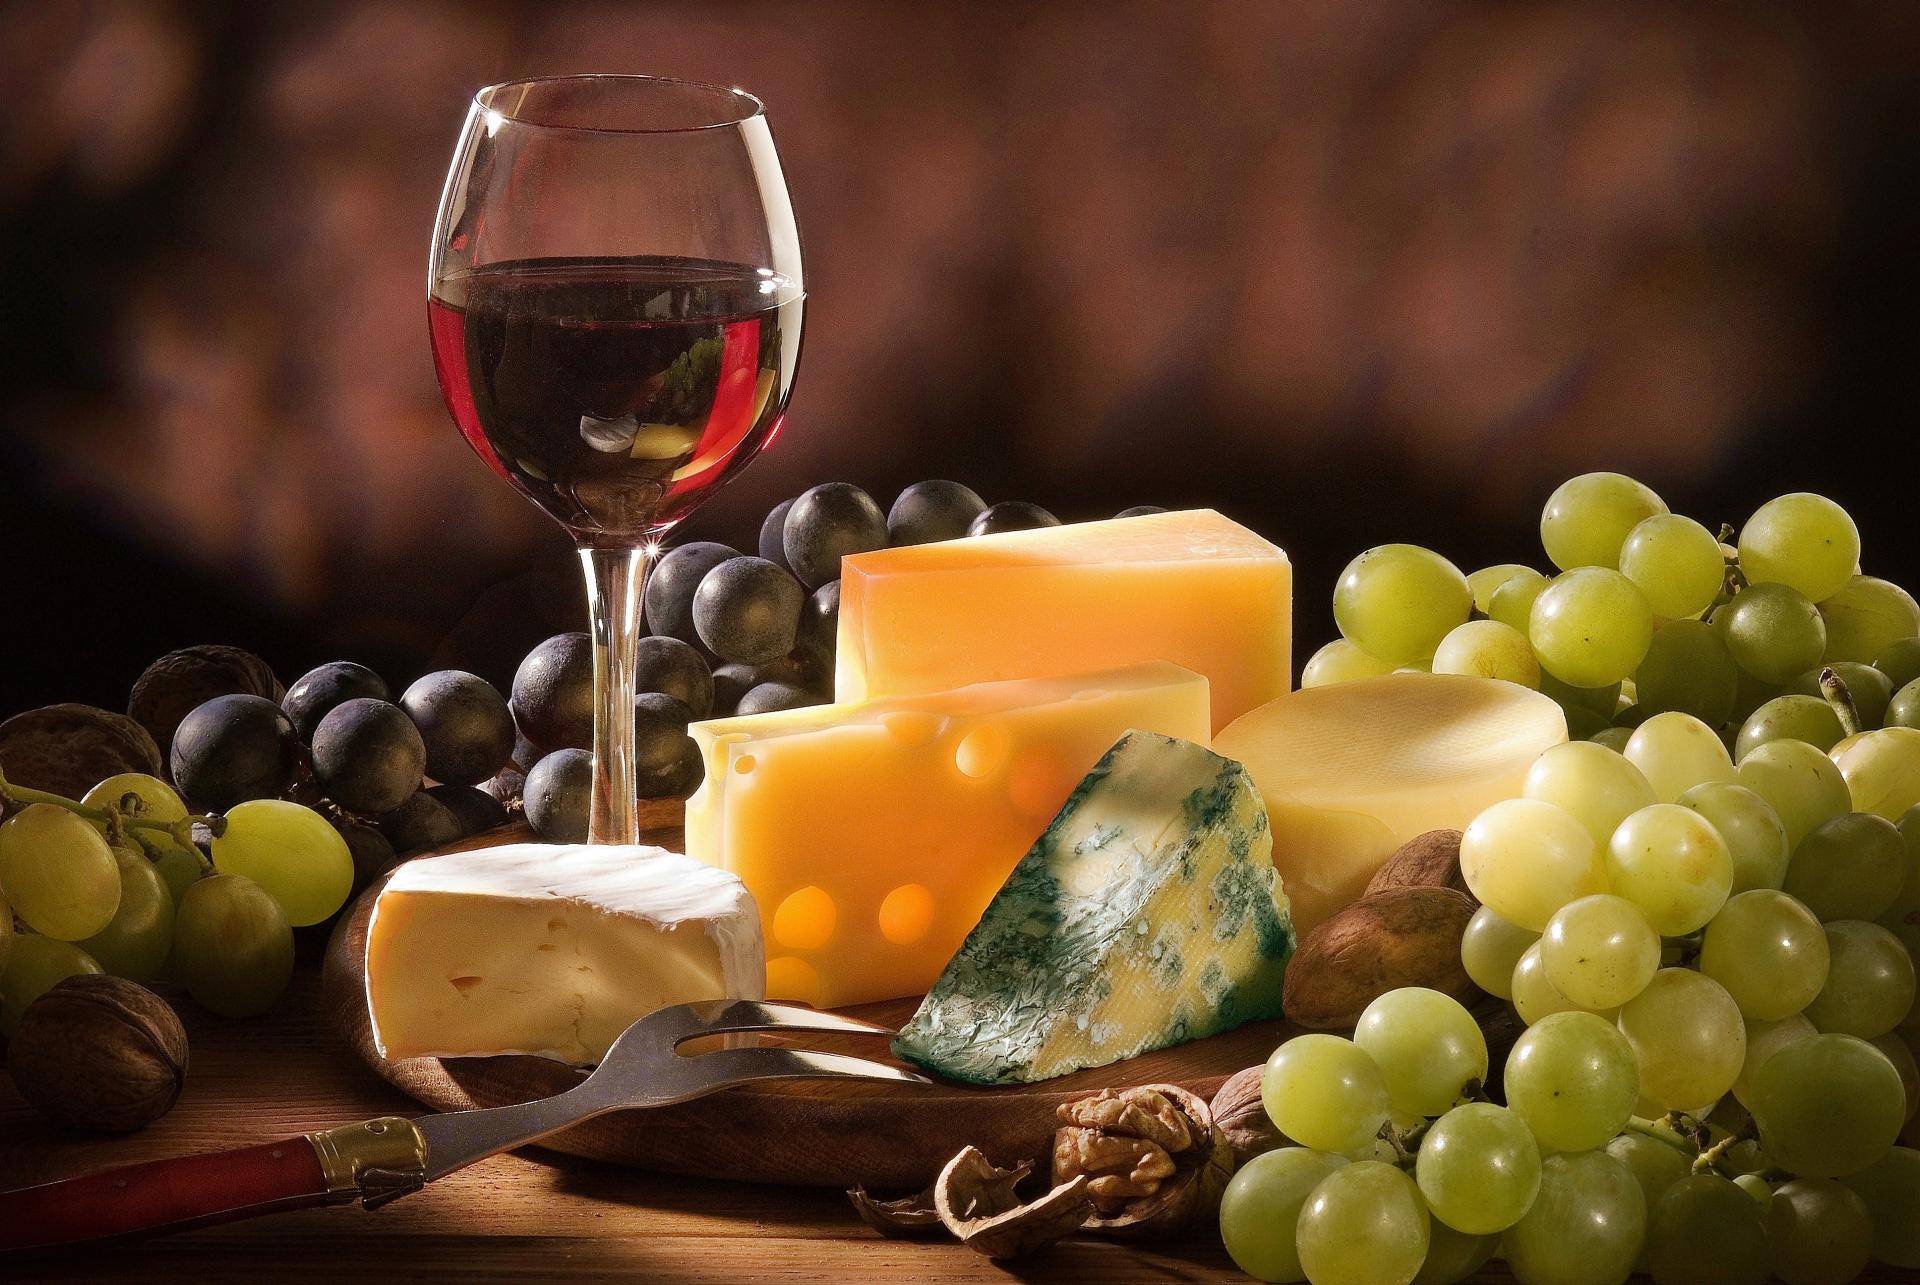 Wallpaper Cheese Wine And Grapes